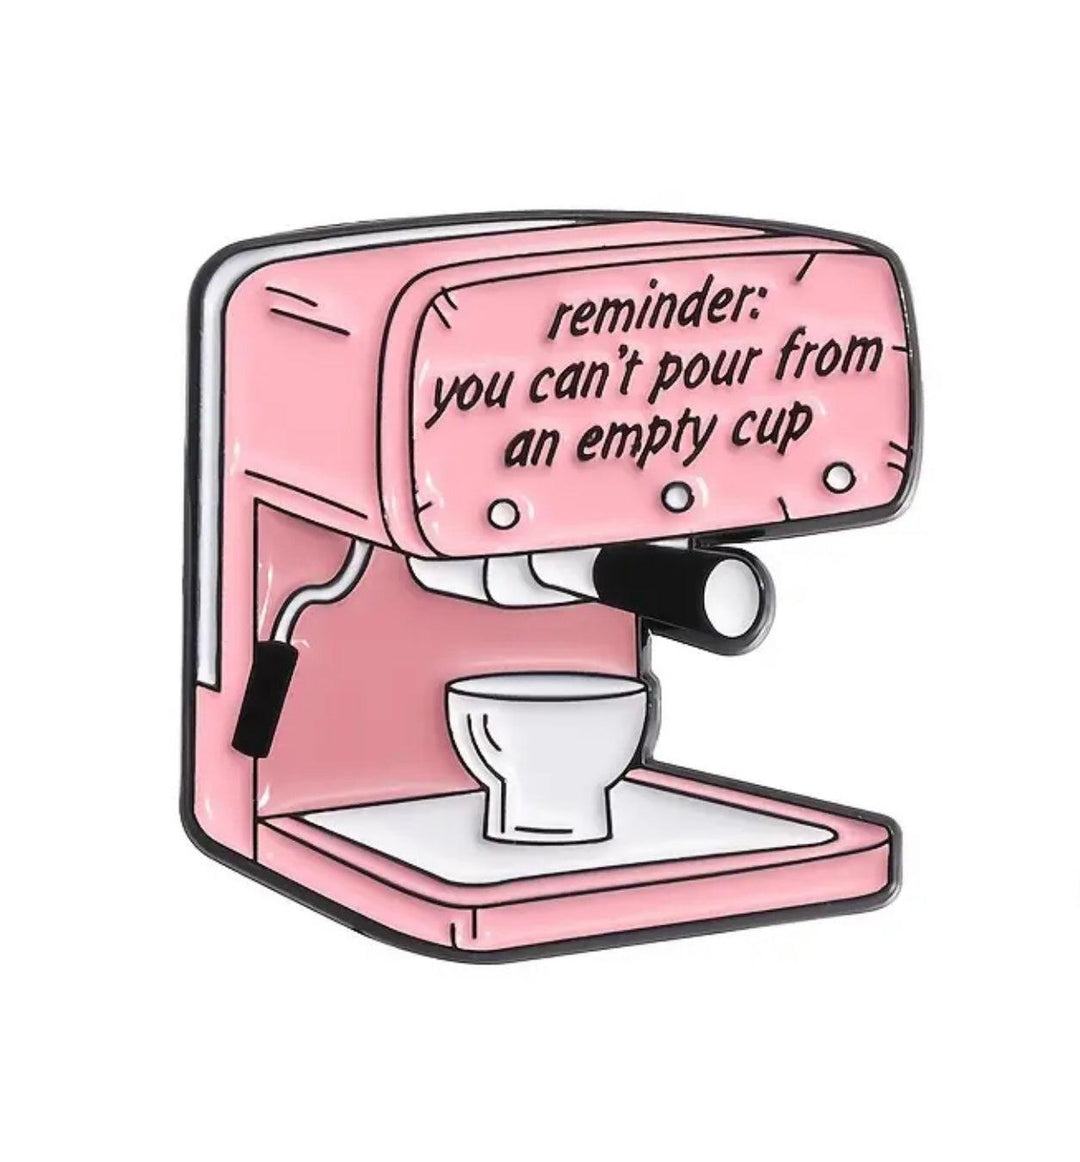 Cant pour from an empty cup- Enamel Pin - Jean Pool